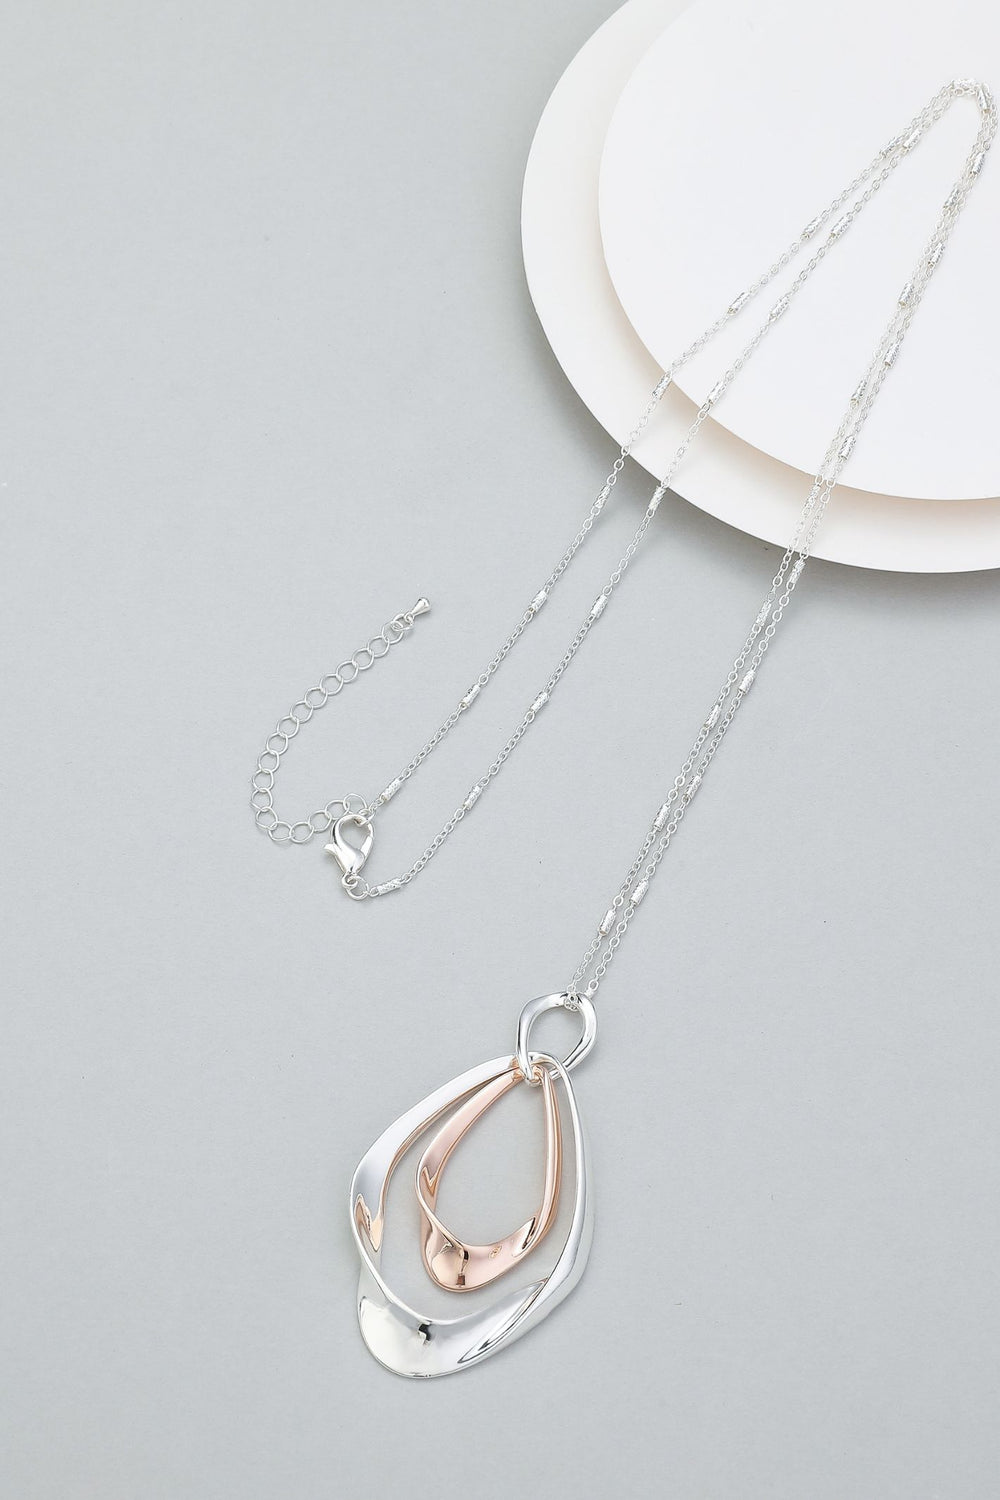 Selsey Long Necklace Silver Rose Gold - Sugarplum Boutique